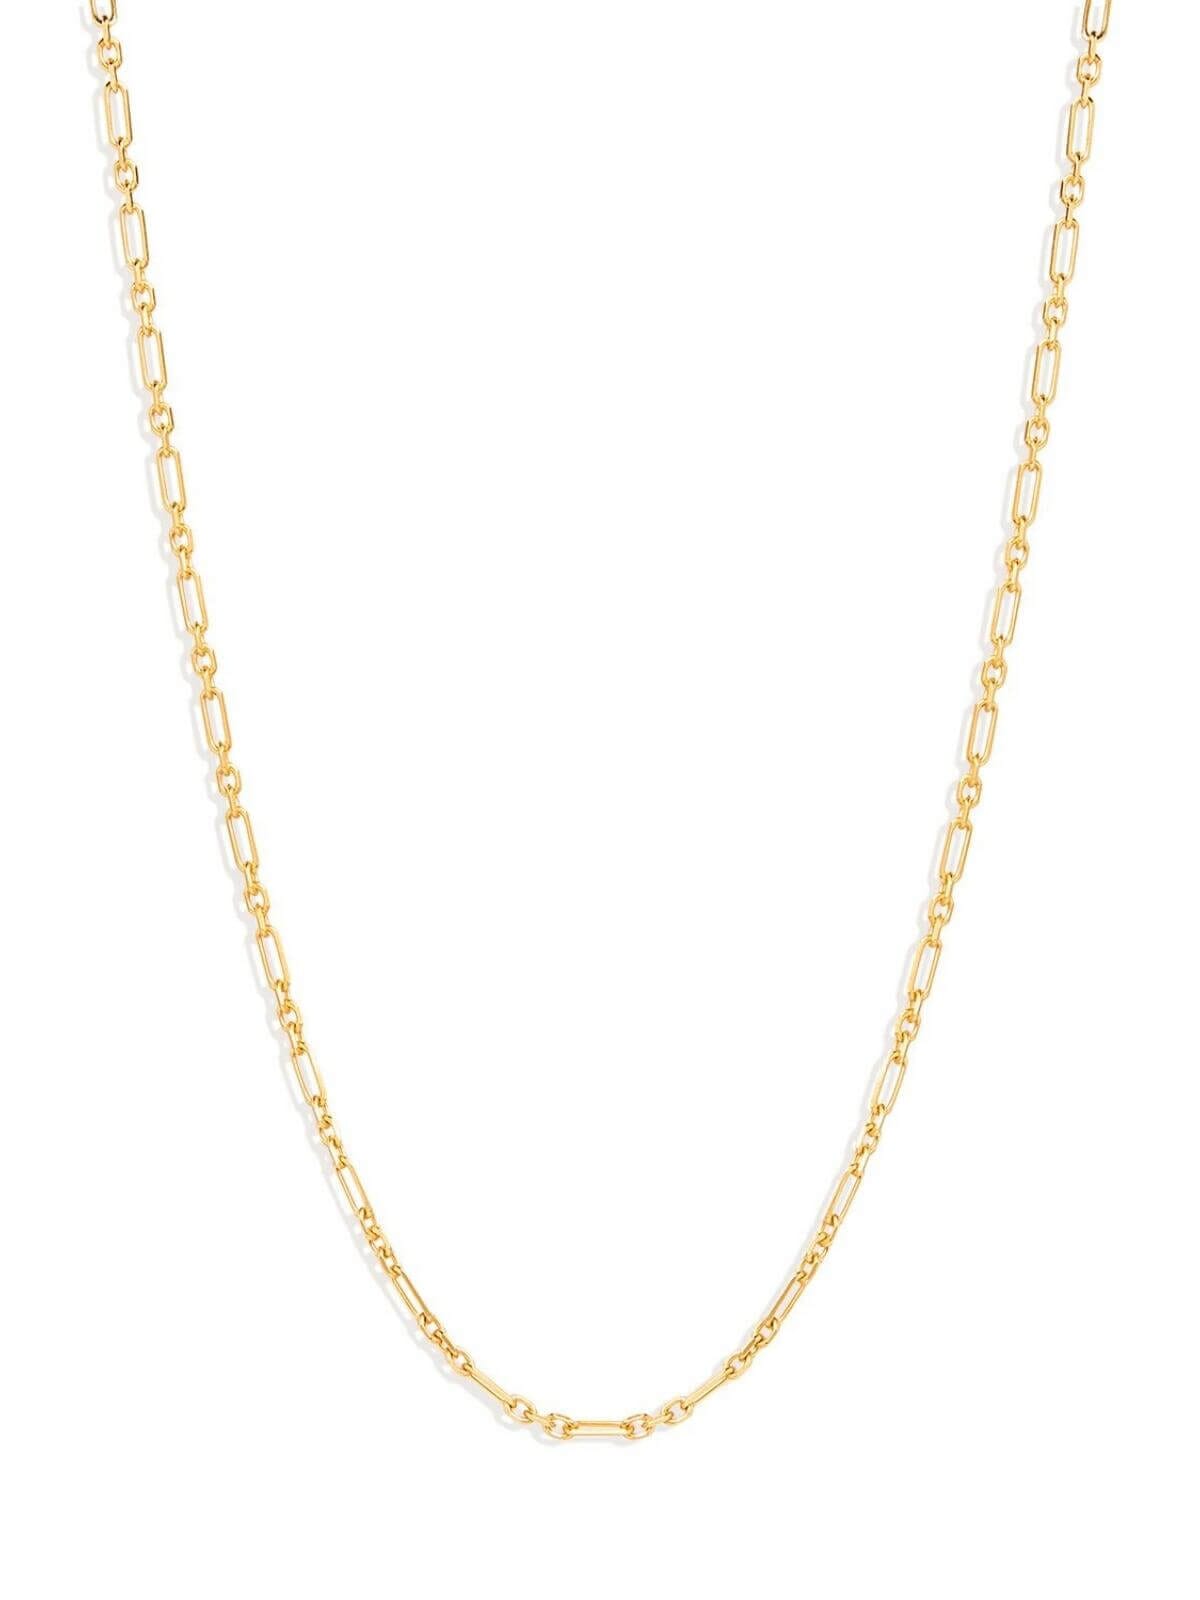 By Charlotte | 19" Mixed Link Chain Necklace - Gold | Perlu